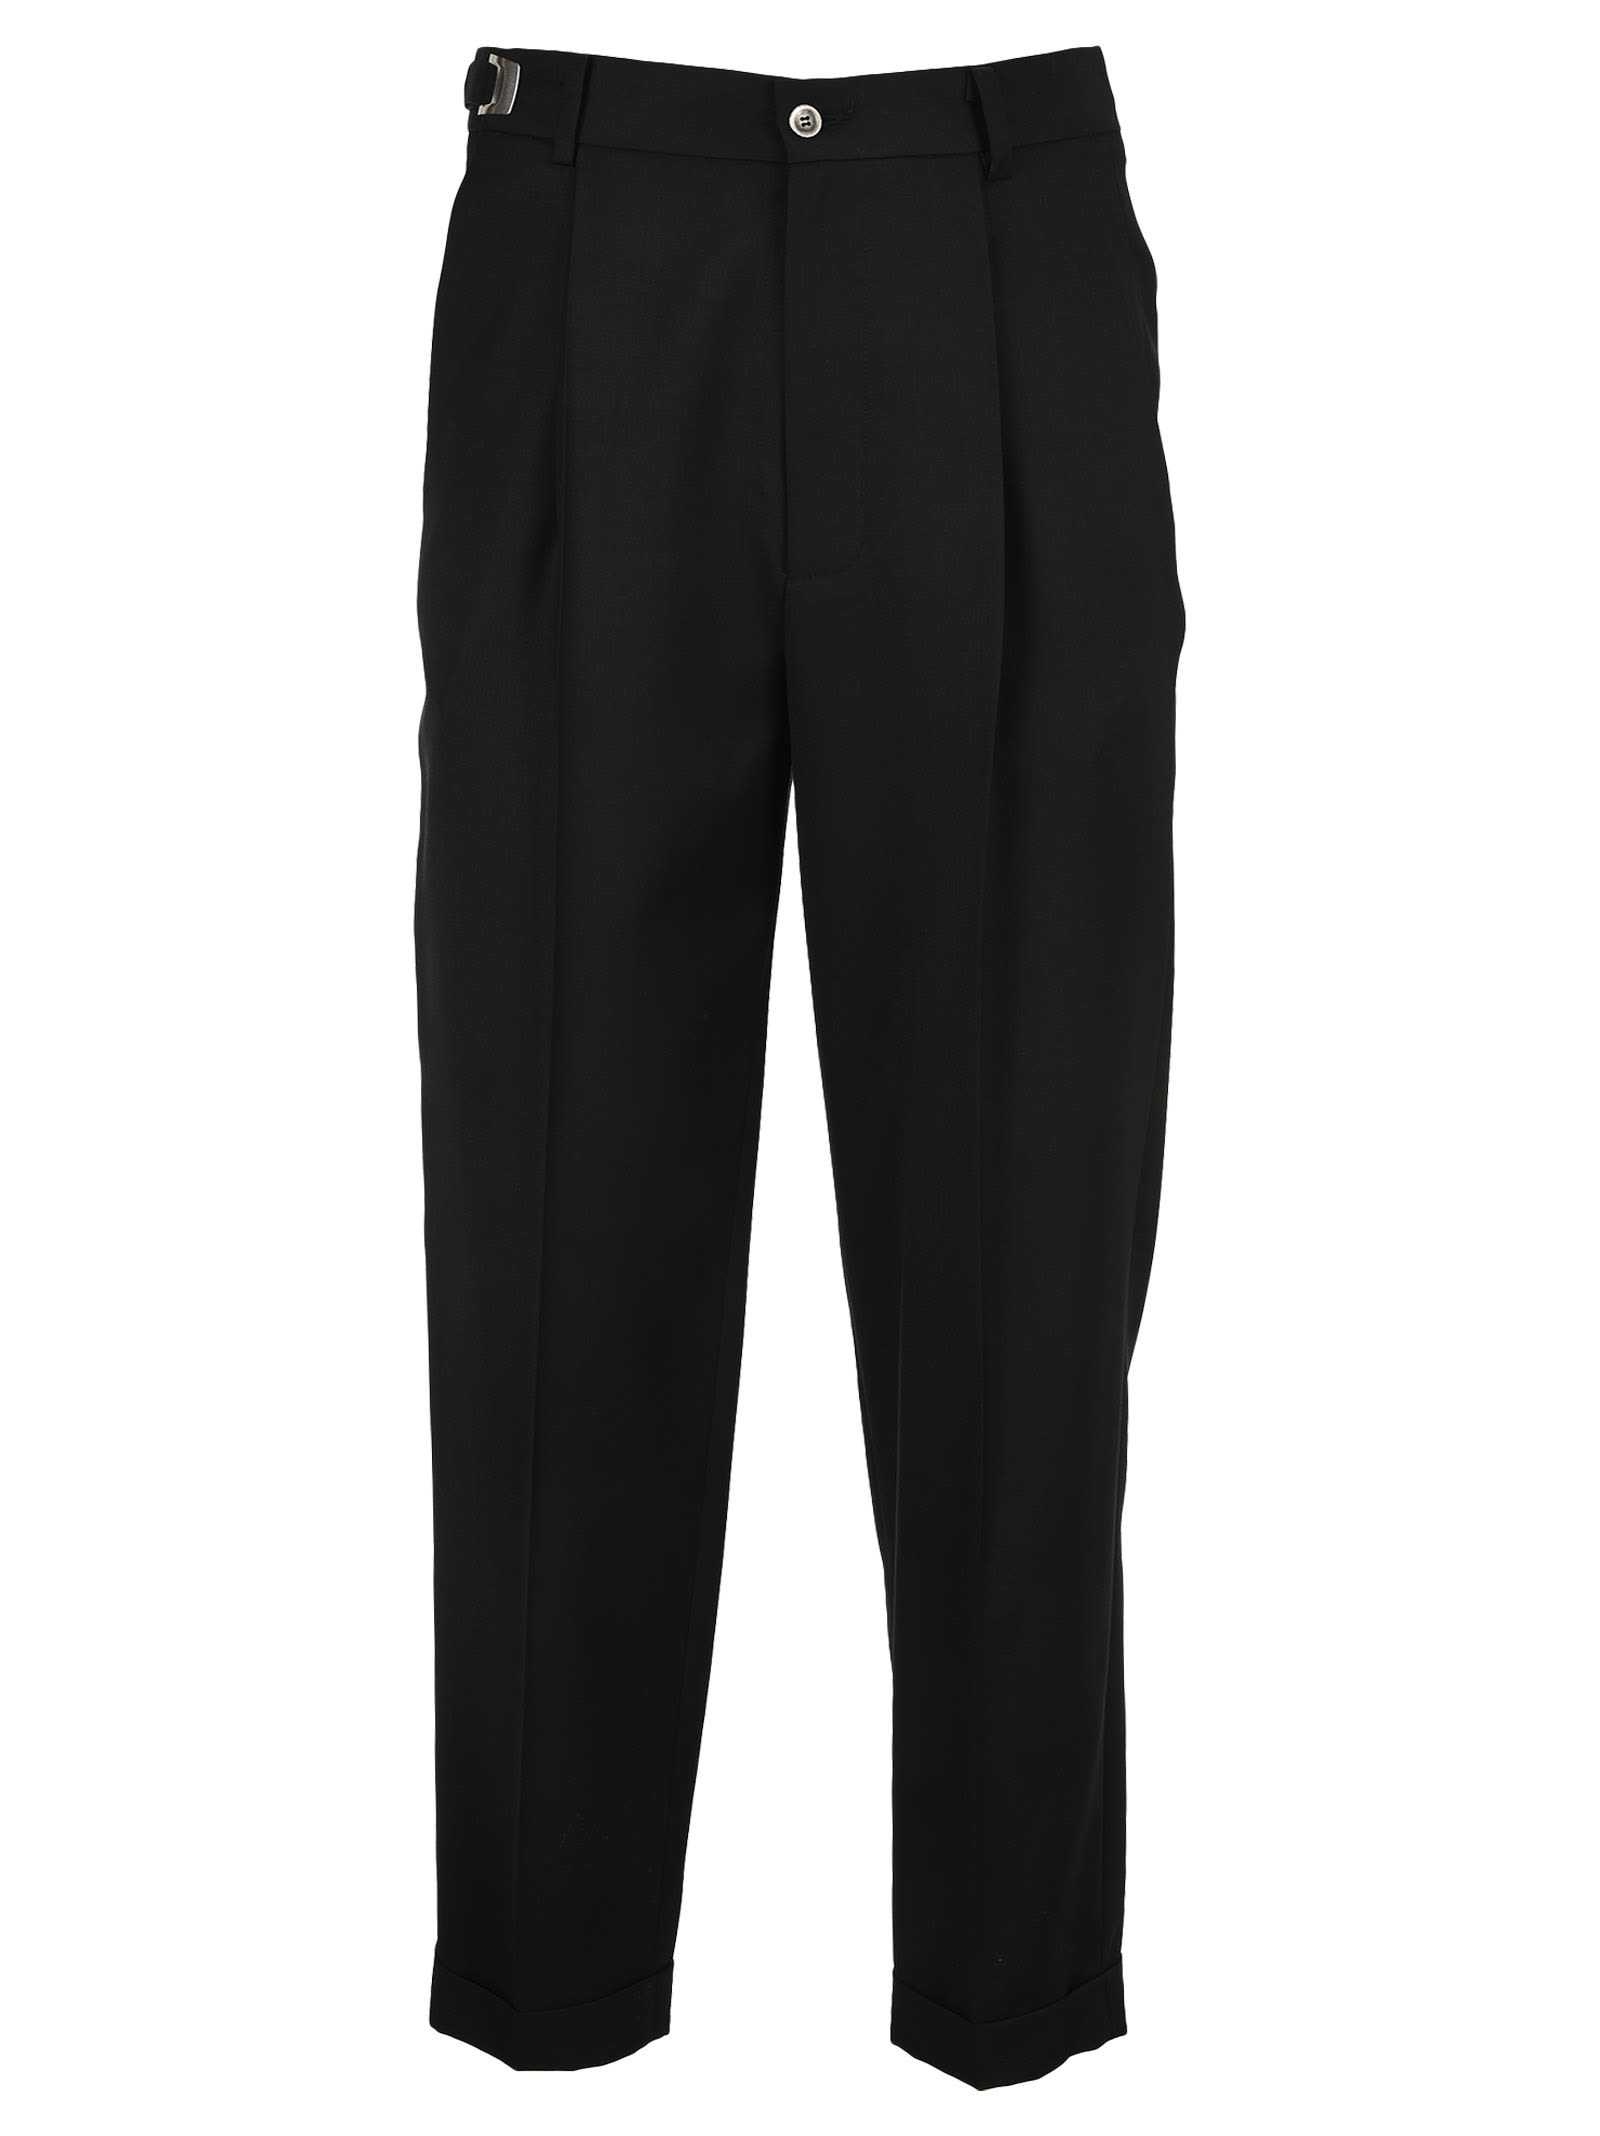 Black Classic Pience Tropical Trousers